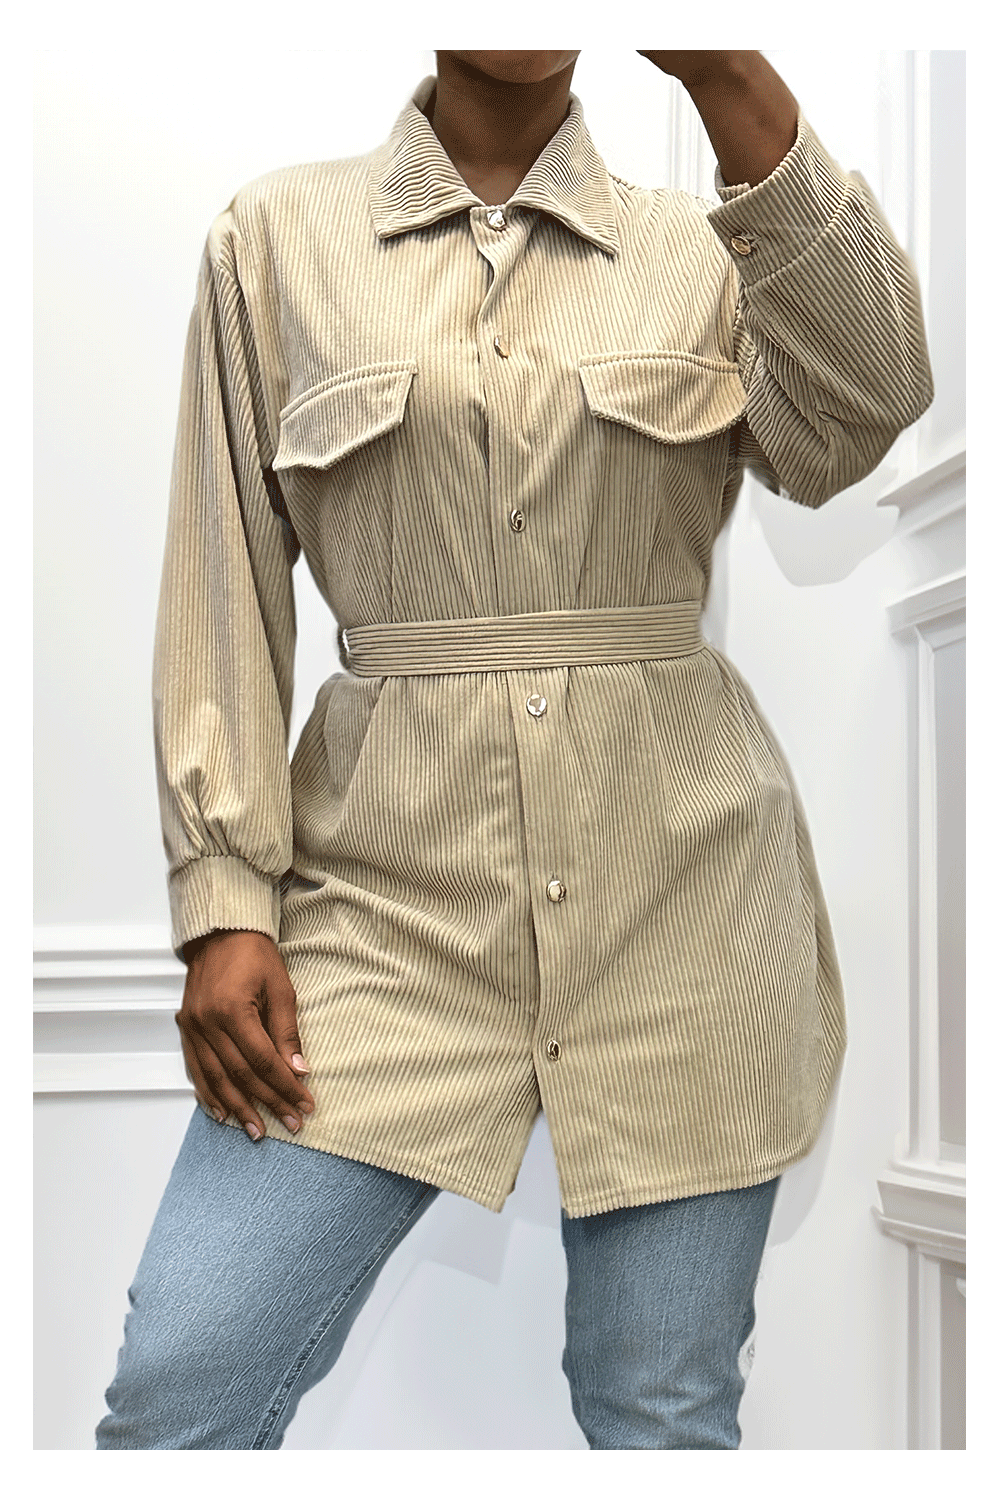 Long over thick ribbed beige shirt with pockets and belt